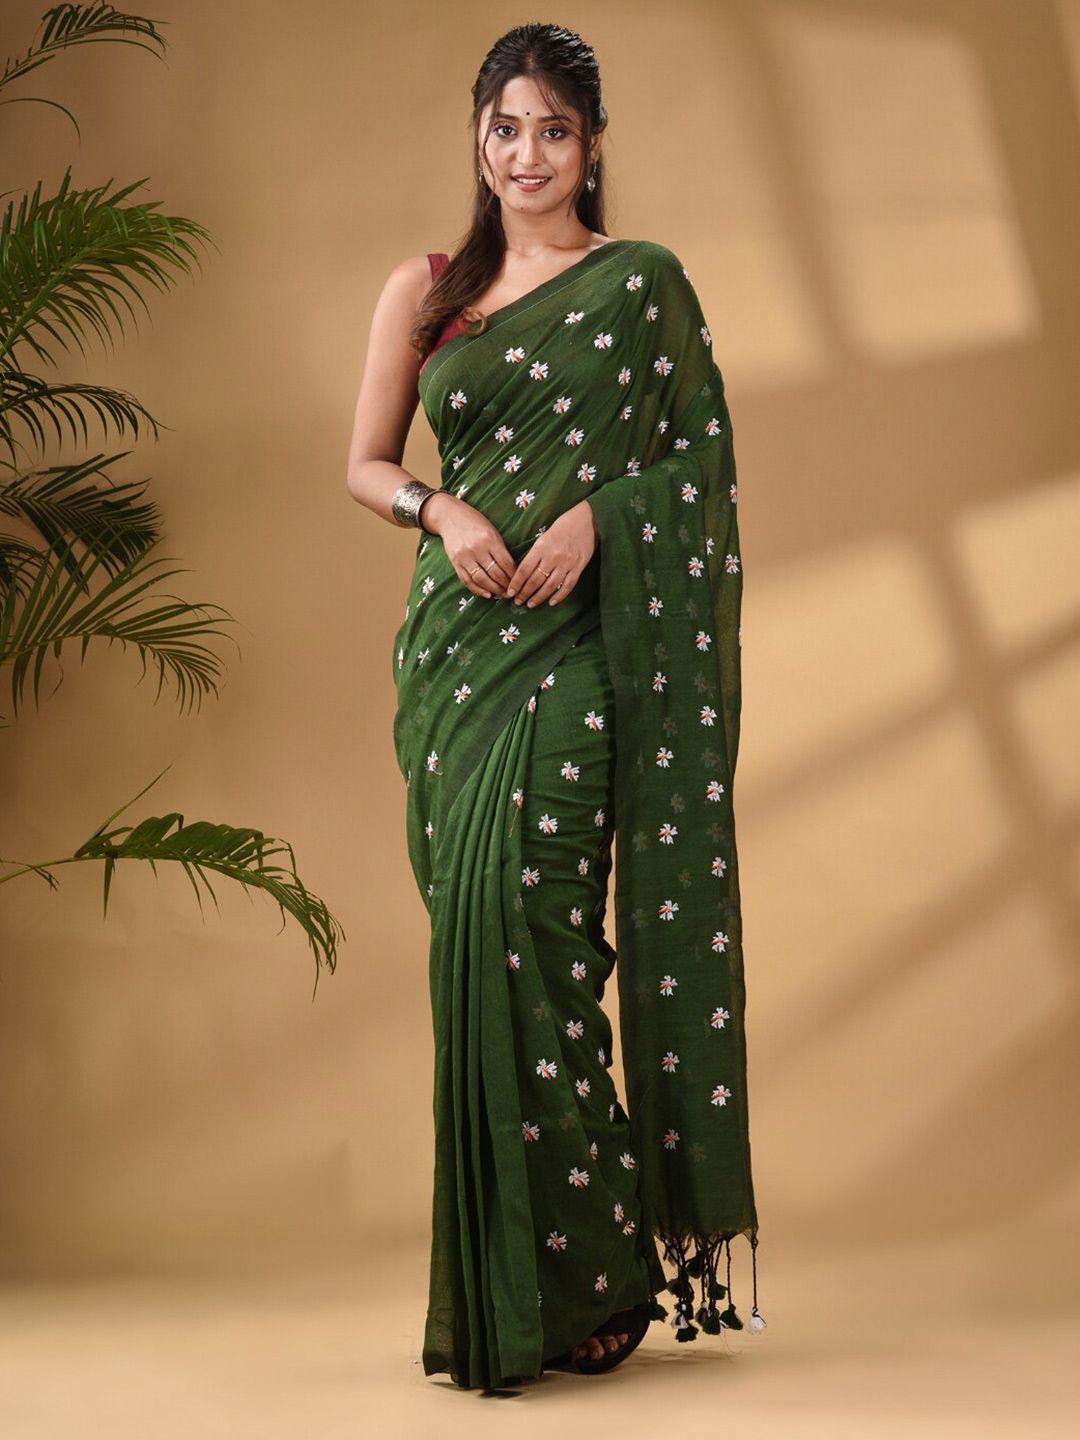 arhi-floral-embroidered-pure-cotton-saree